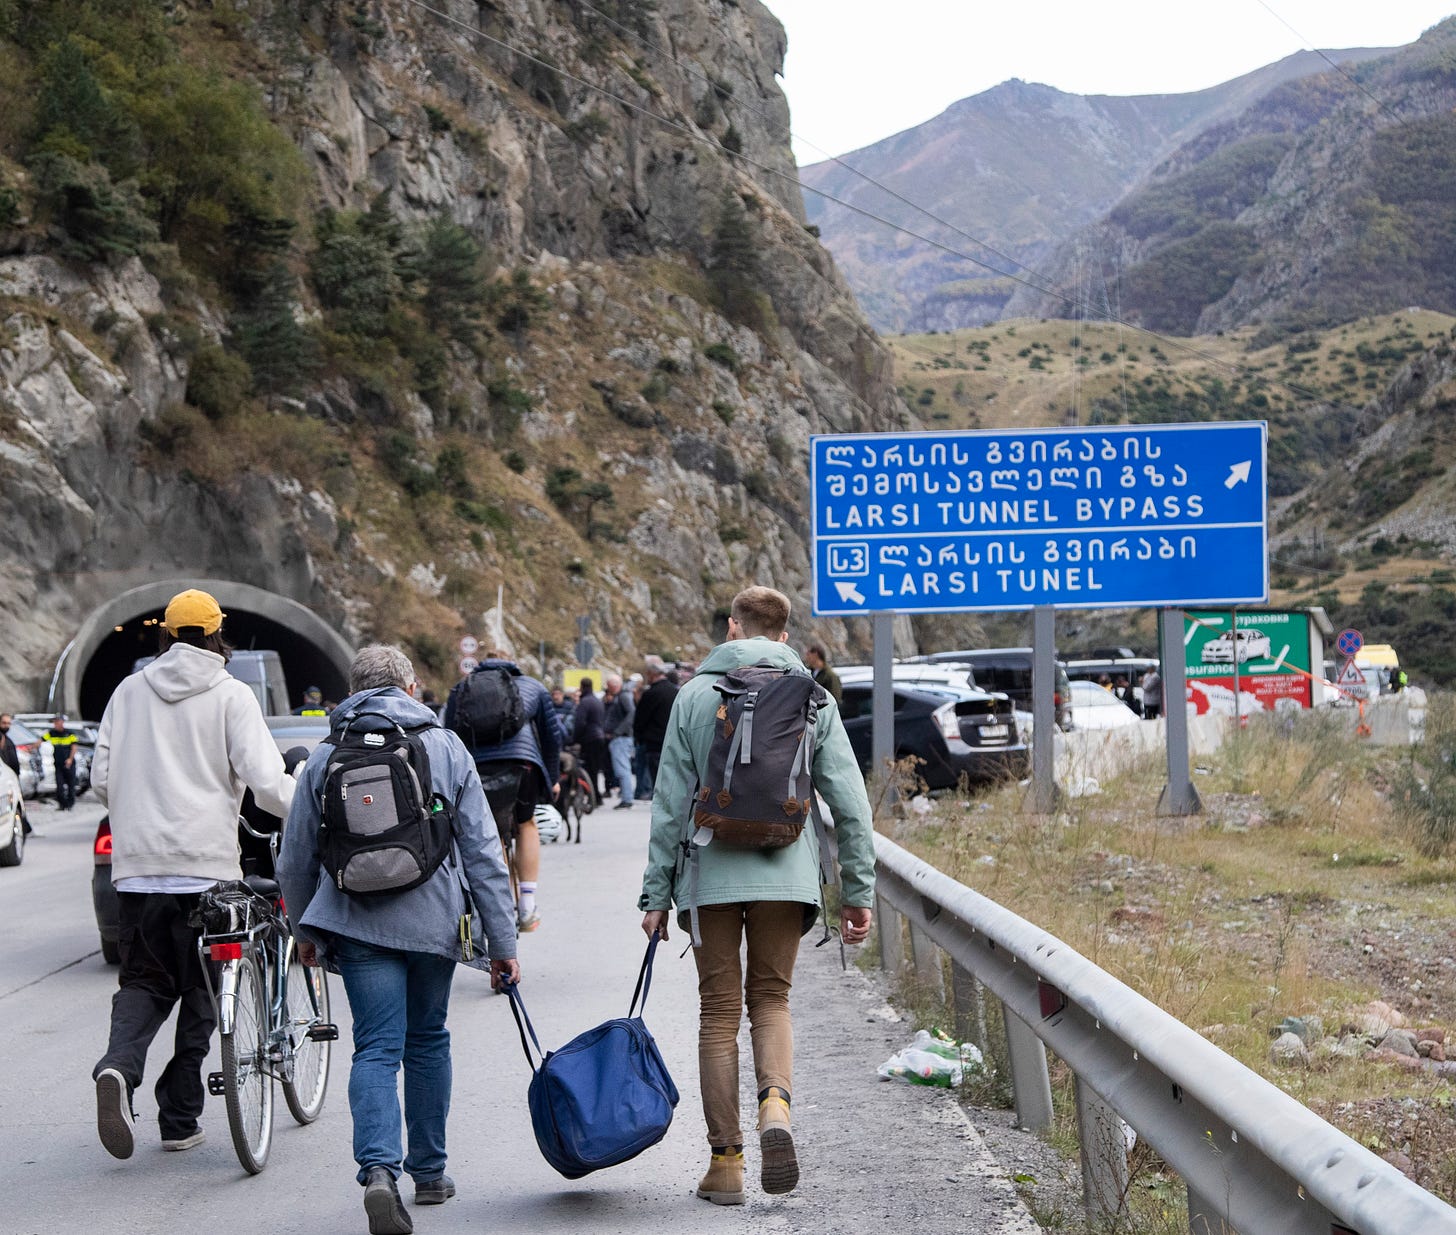 People trying to cross into Georgia on foot.